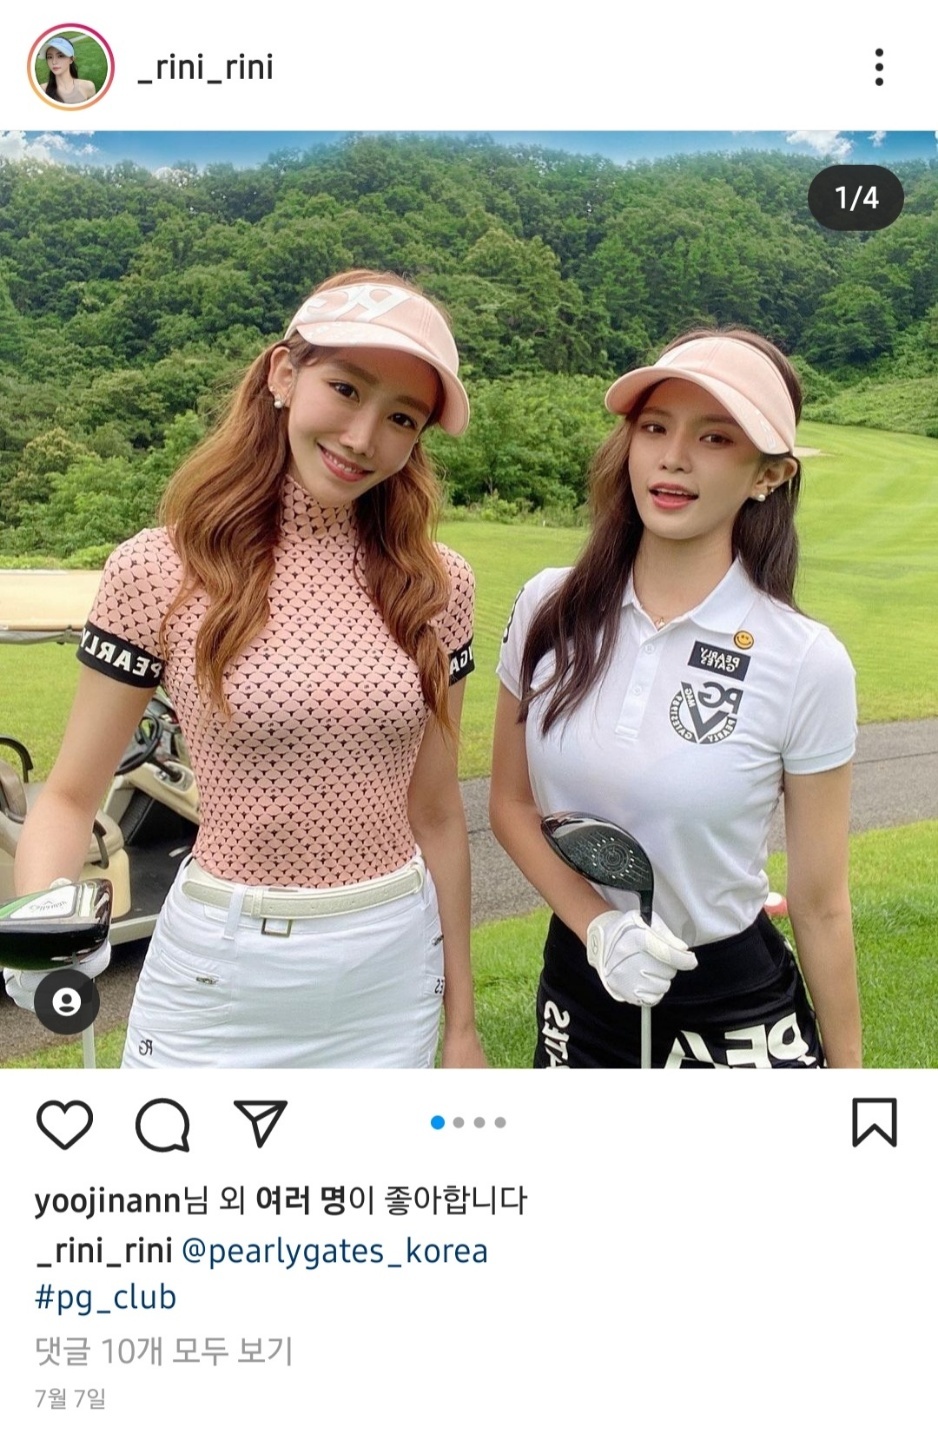 Jeong Ye-rin poses with her friend in colorful golfware. (Jeong Ye-rin's Instagram)